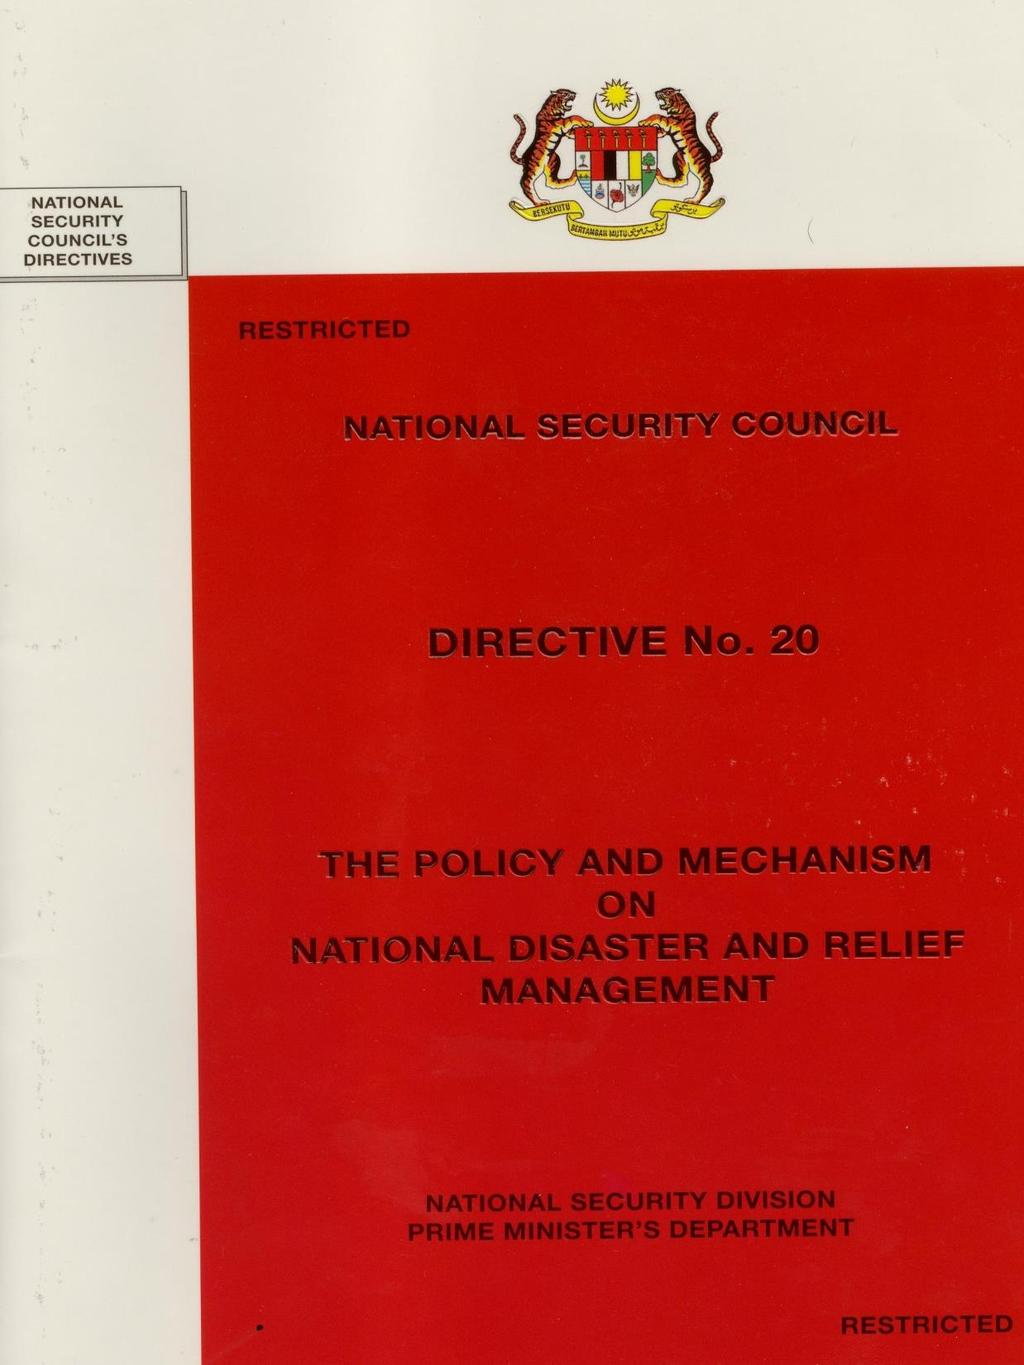 National Security Council (NSC) Directive No 20: The Policy and Mechanism for National Disaster Management Relief